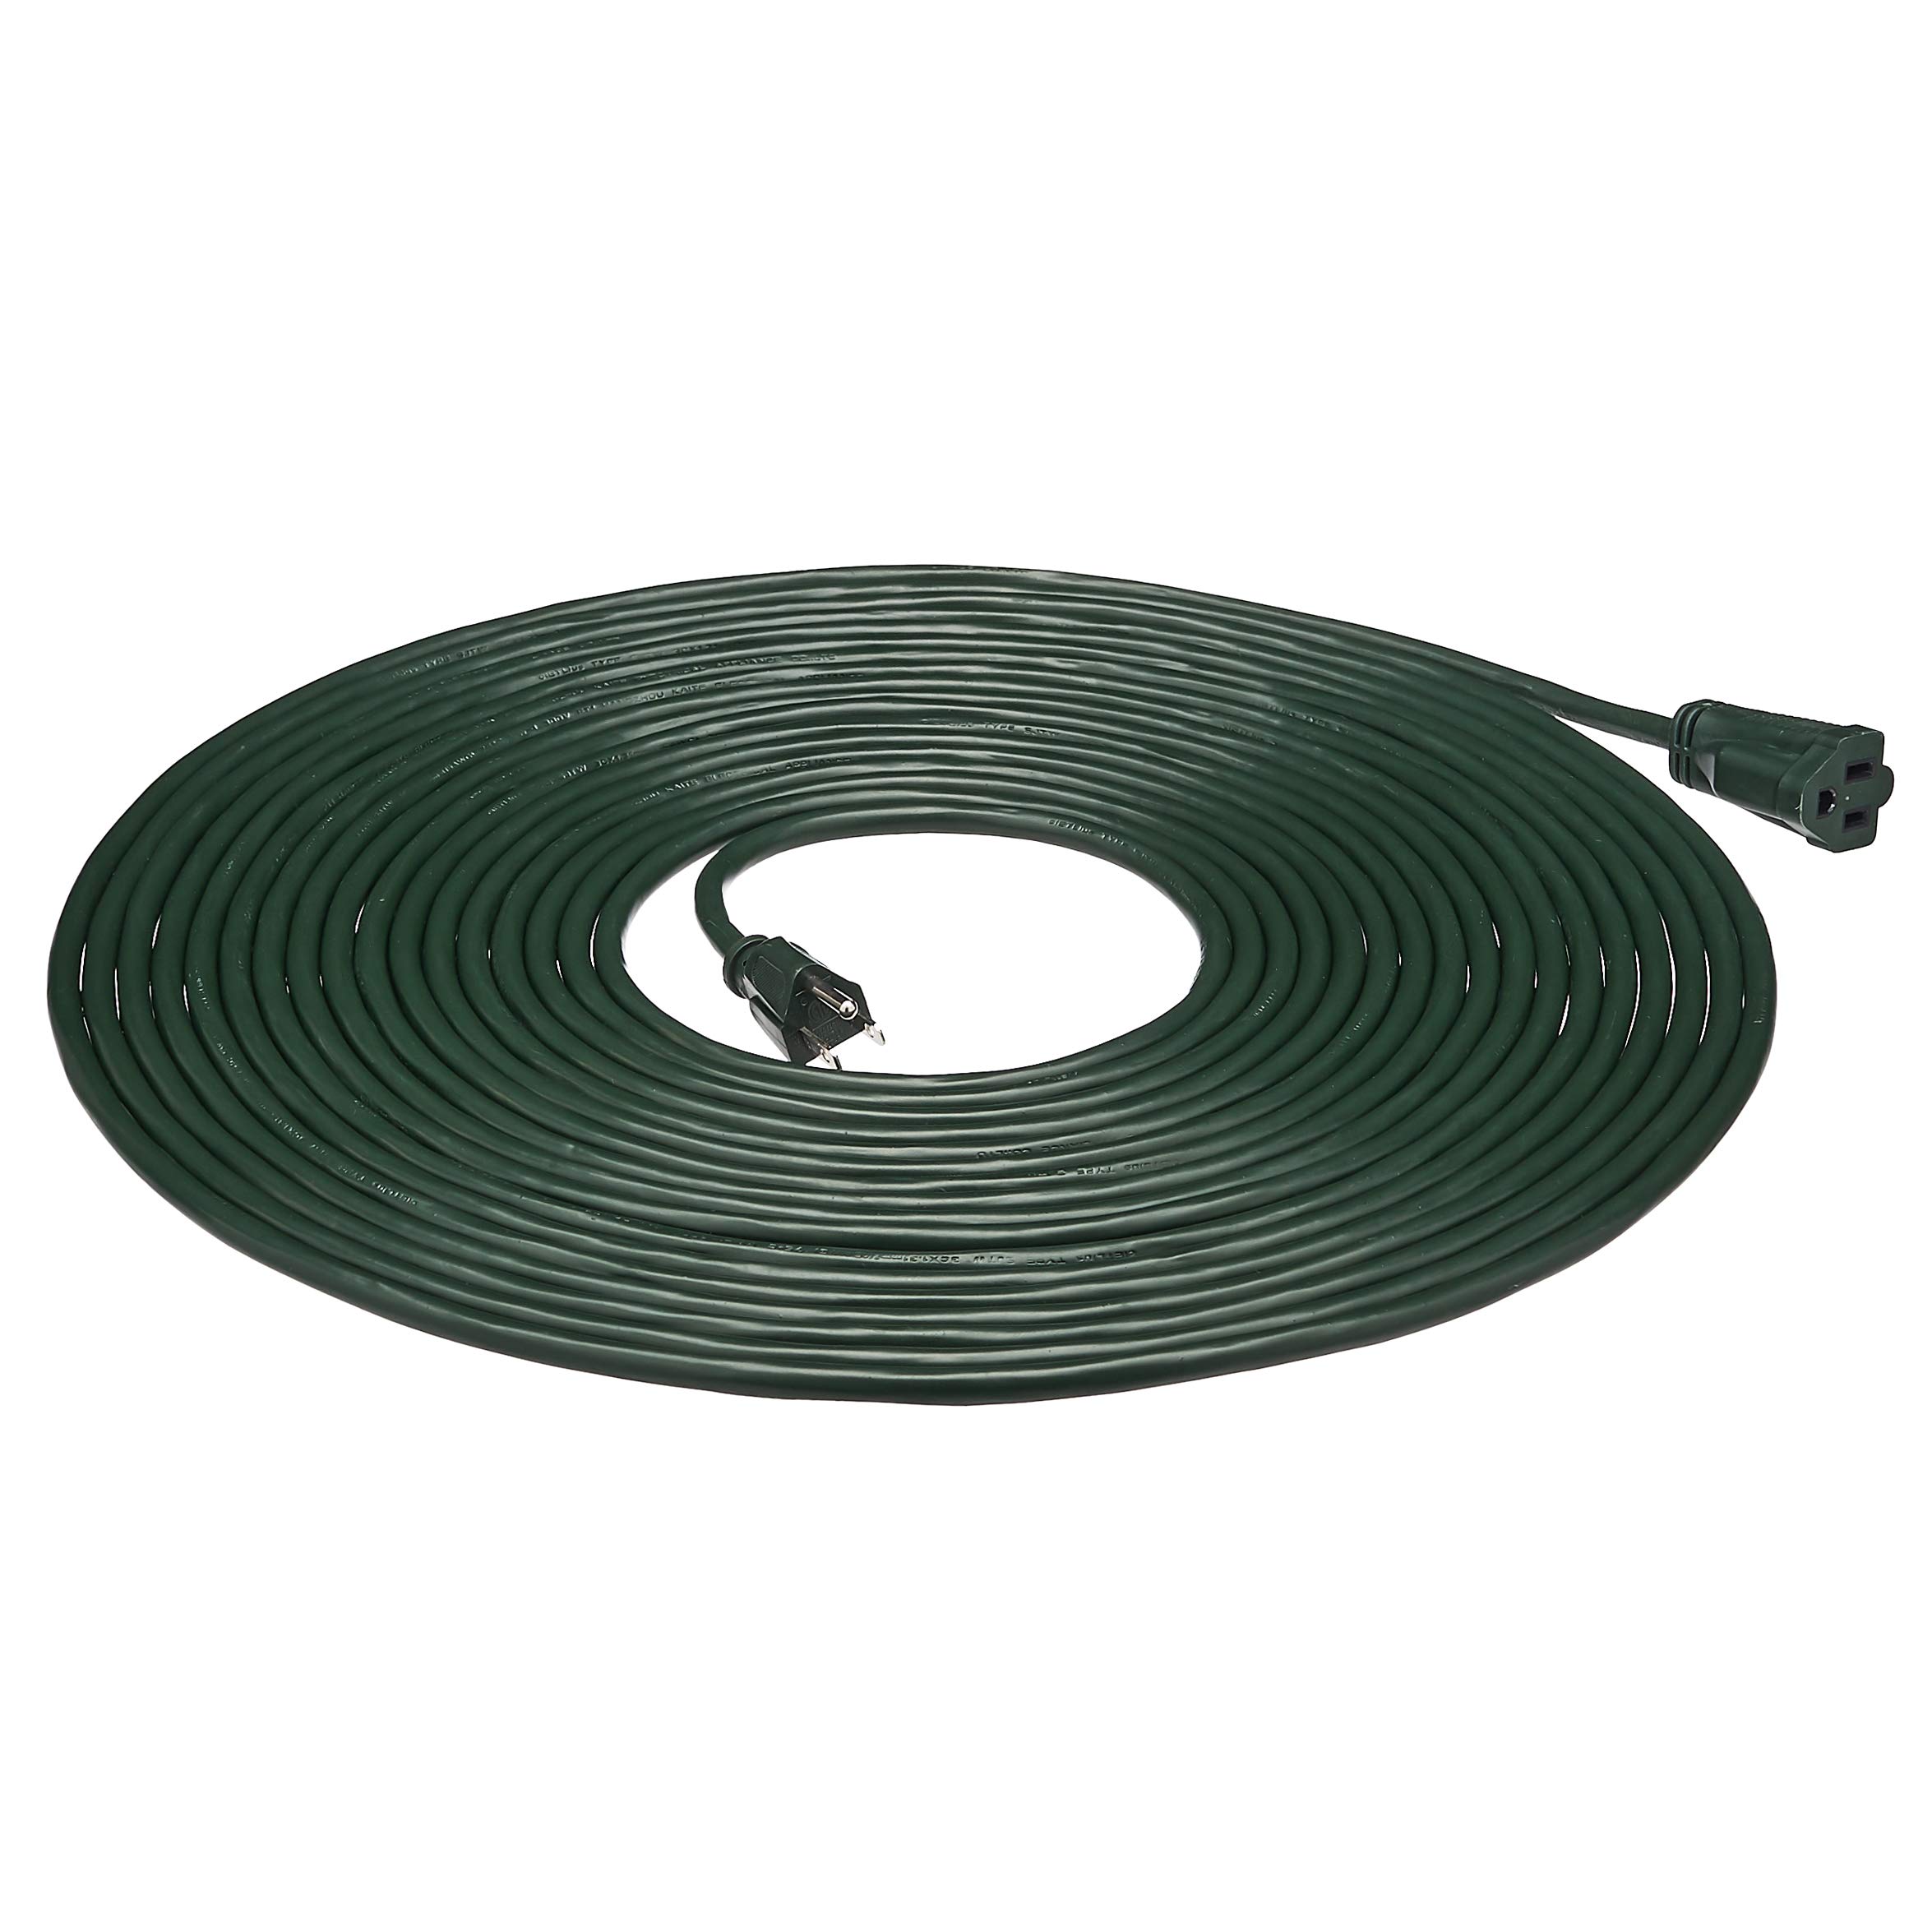 Prime Members: 50' Amazon Basics 3-Prong Vinyl Indoor/Outdoor Extension Cord (Green) $15.50 + Free Shipping w/ Prime or on $25+